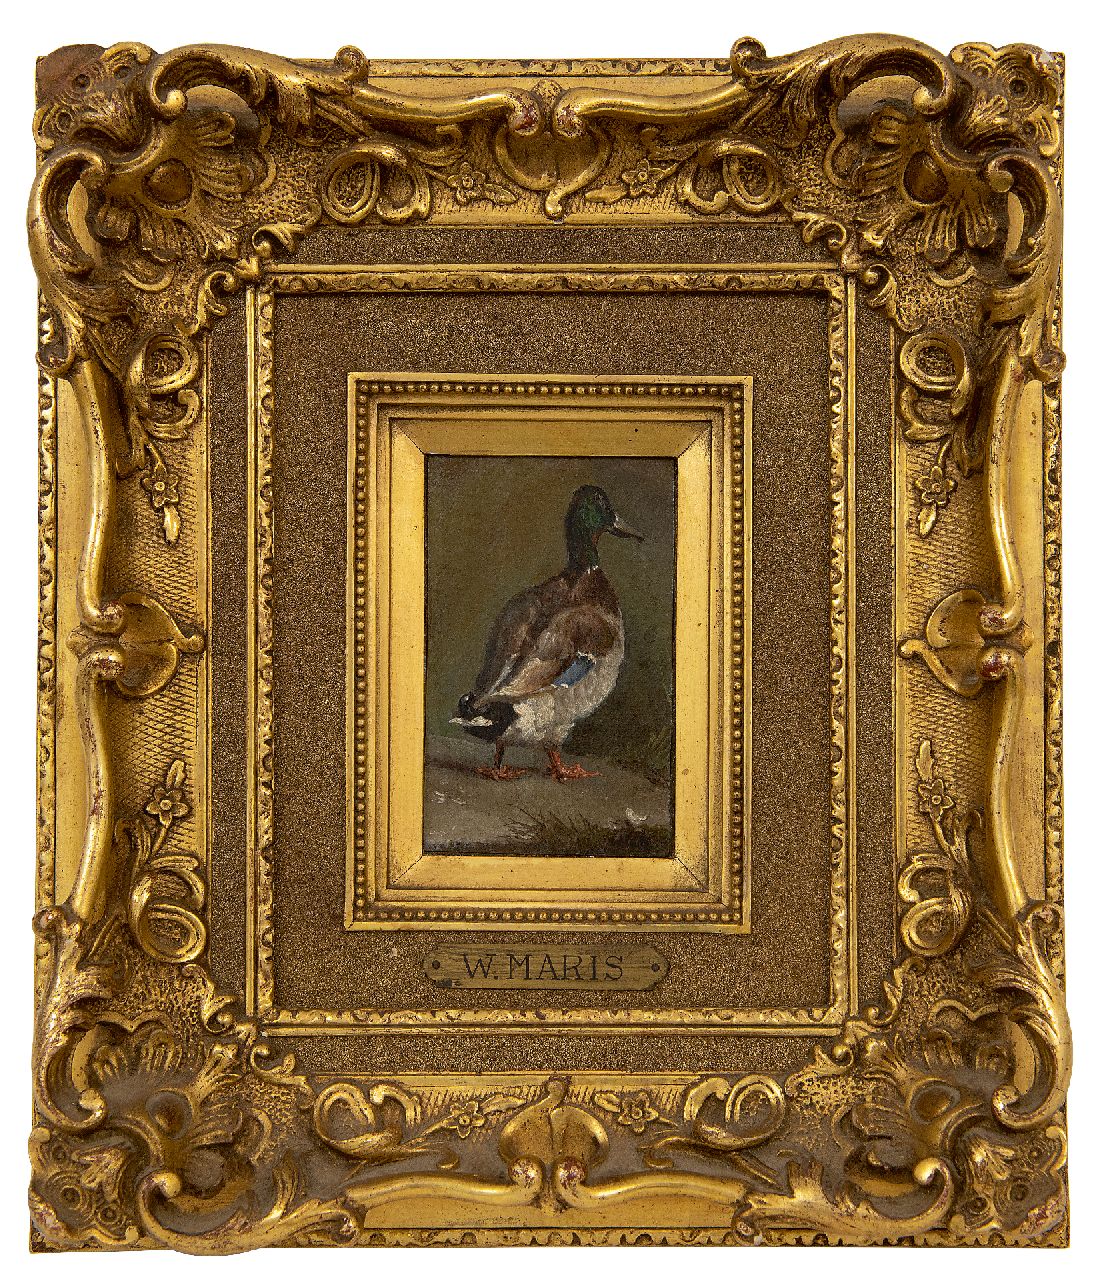 Maris W.  | Willem Maris | Paintings offered for sale | Study of a drake, oil on paper laid down on panel 10.2 x 6.5 cm, signed l.r. with initials